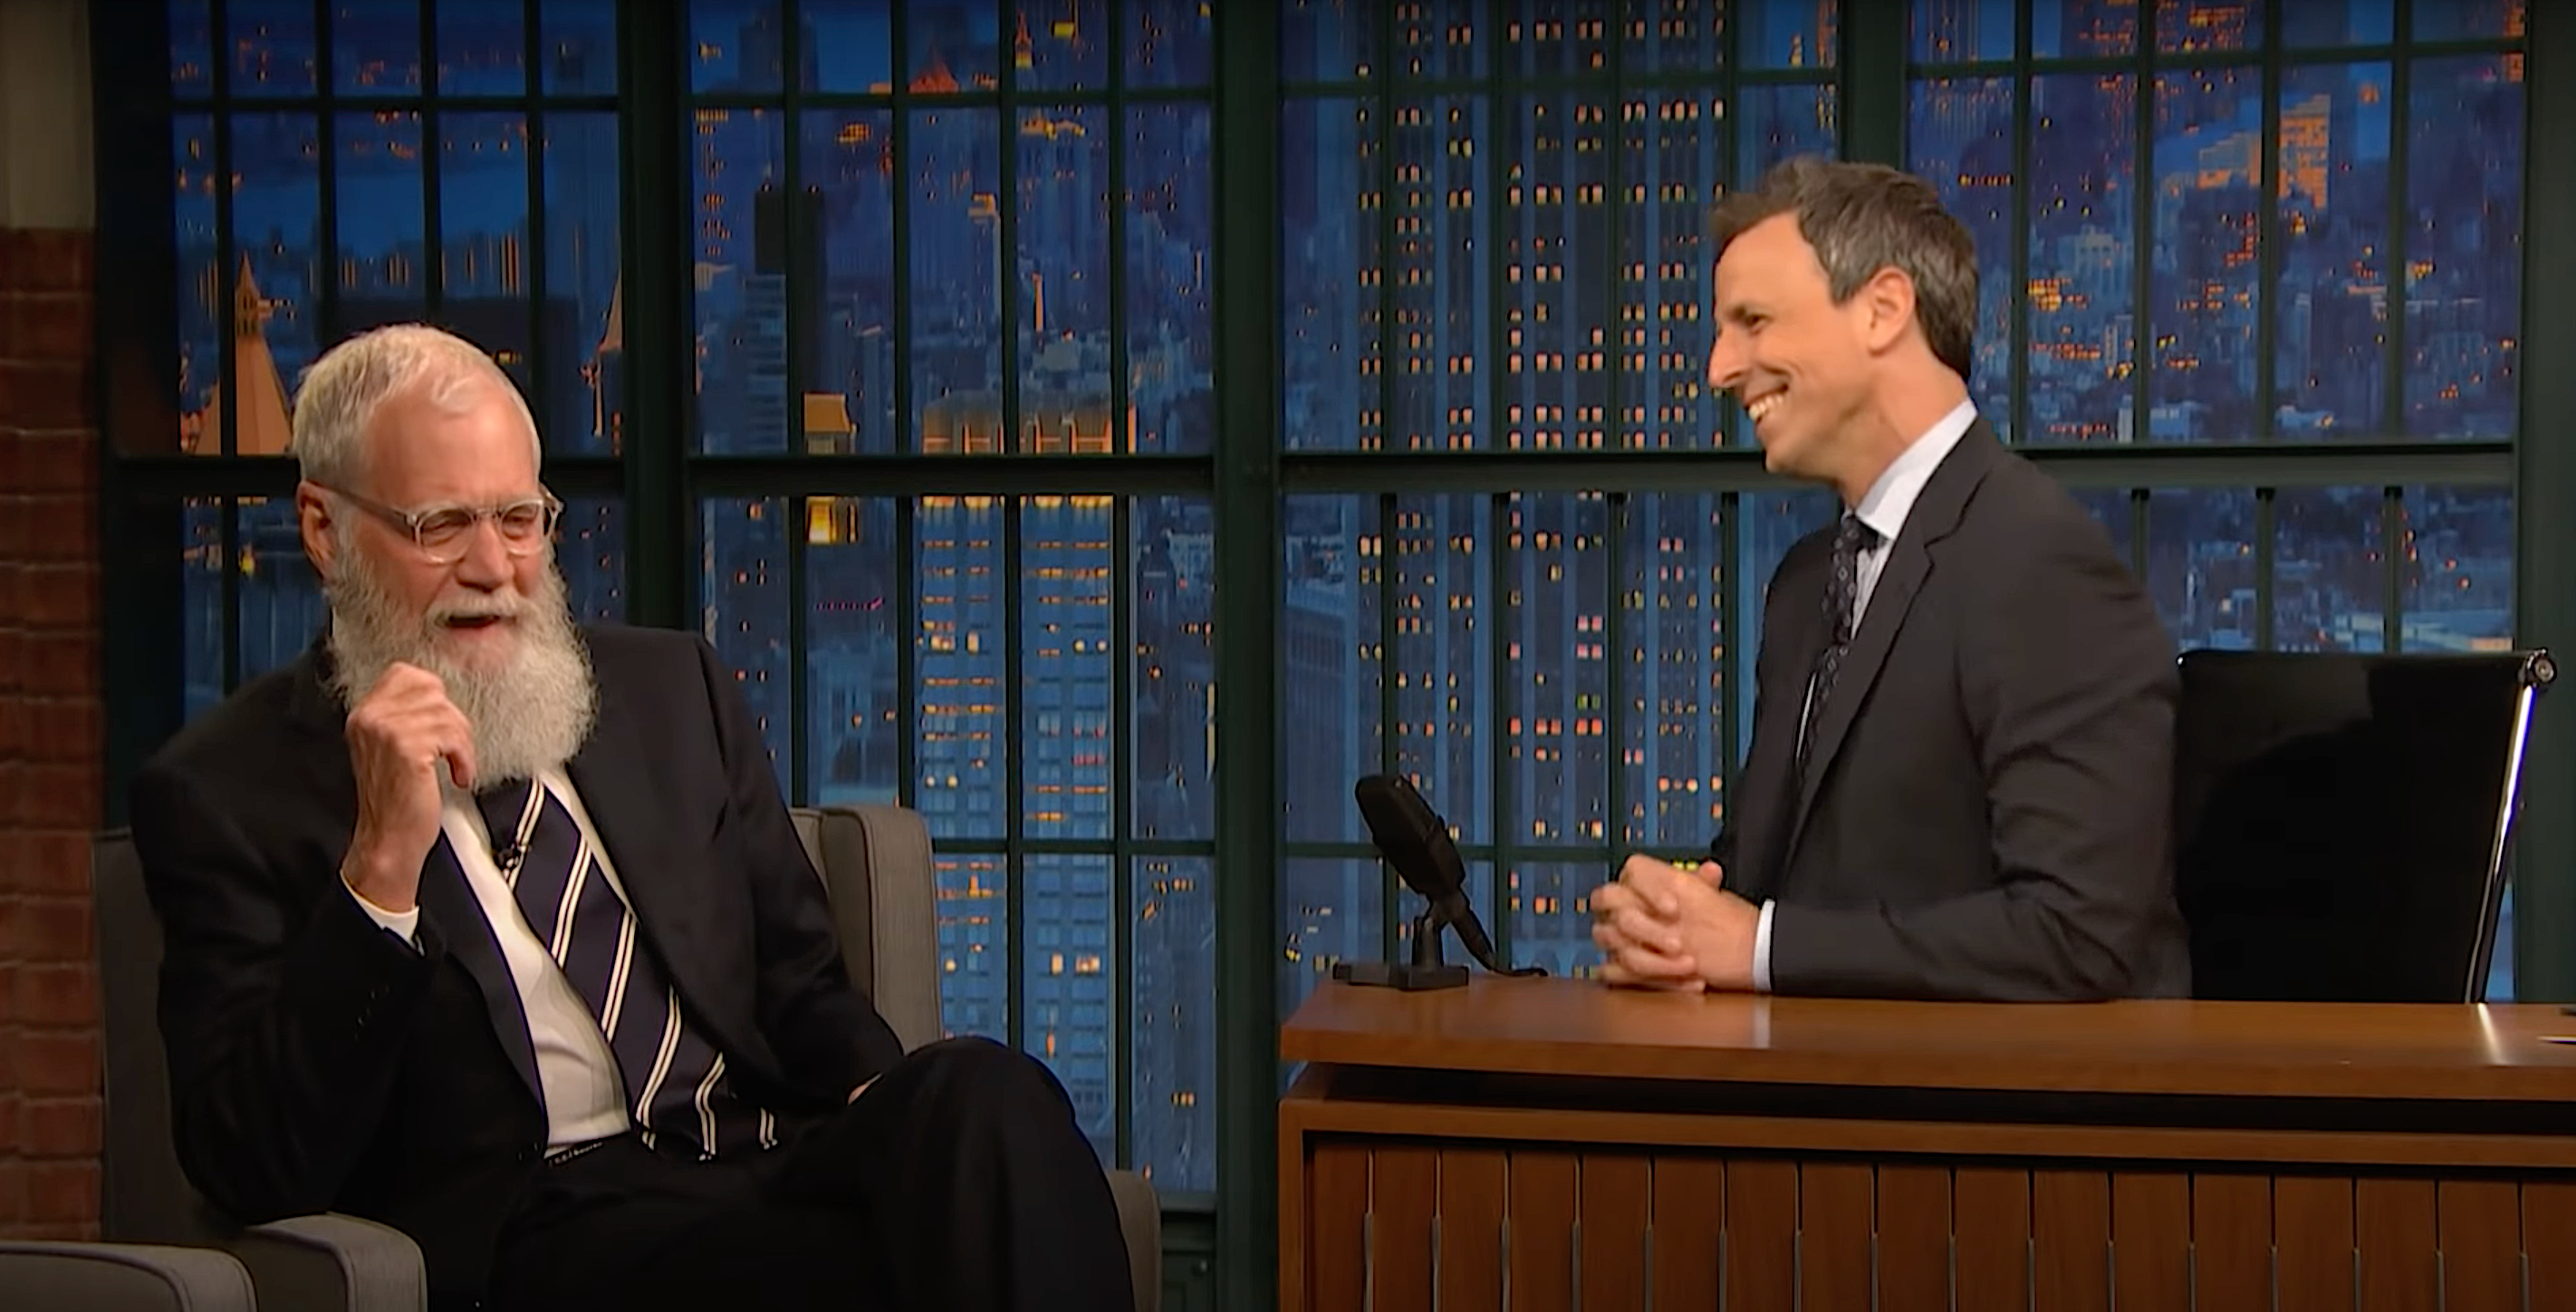 It’s a Late Night summit, as David Letterman drops by his old gig to talk to Seth Meyers